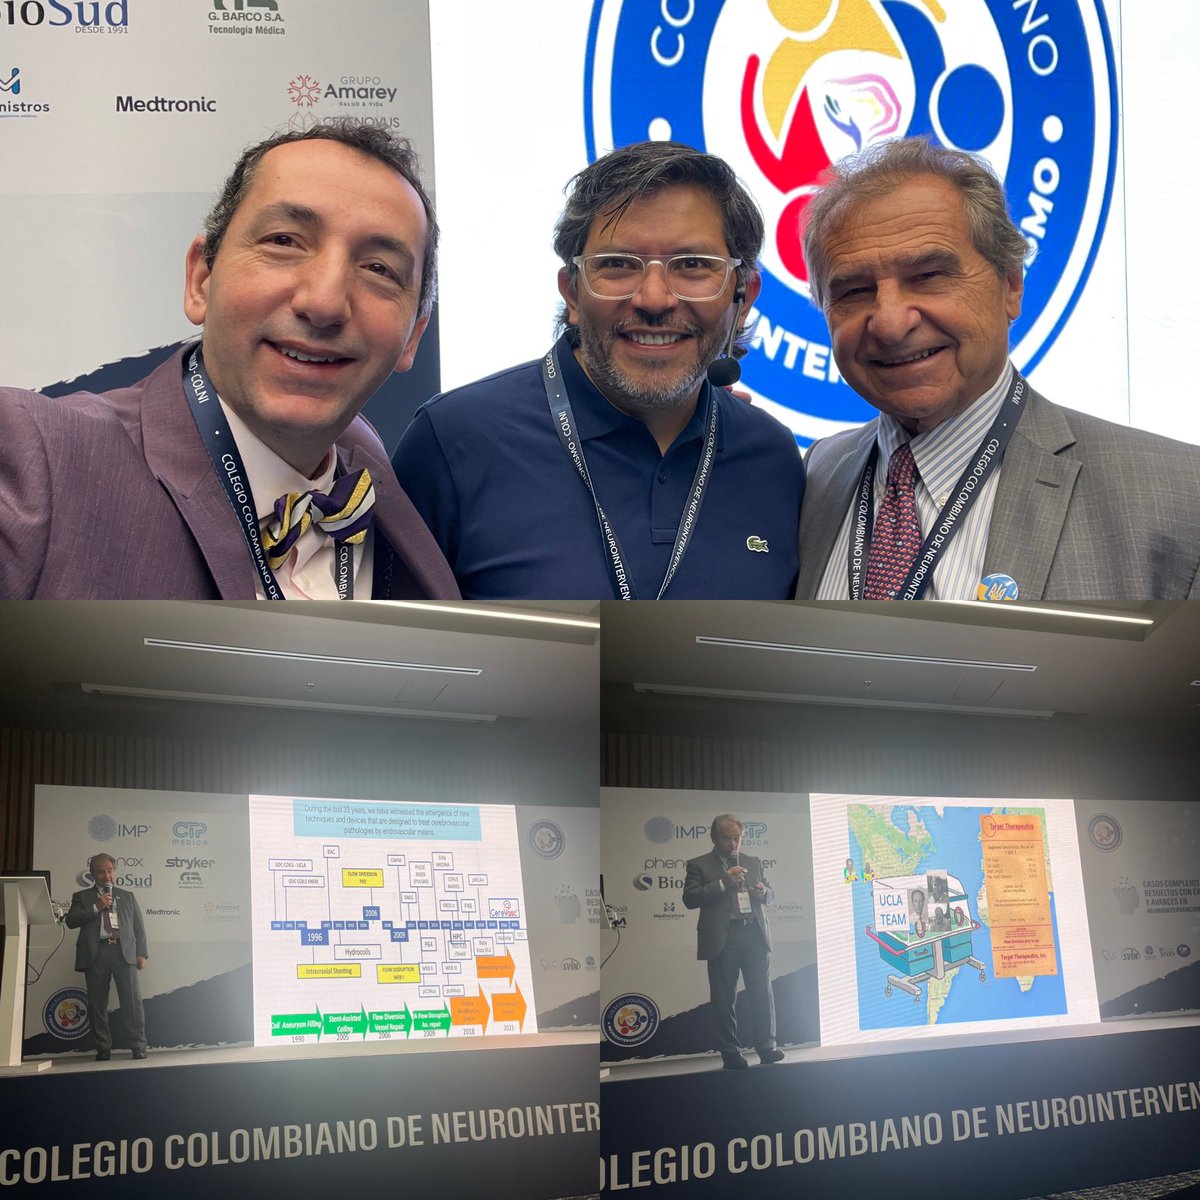 Kicking off the second day of the conference with Professor Pedro Lylyk who gave a fantastic lecture on the history and future of Neuroendovascular @eneri_neuro @boris_pabon #Bogota